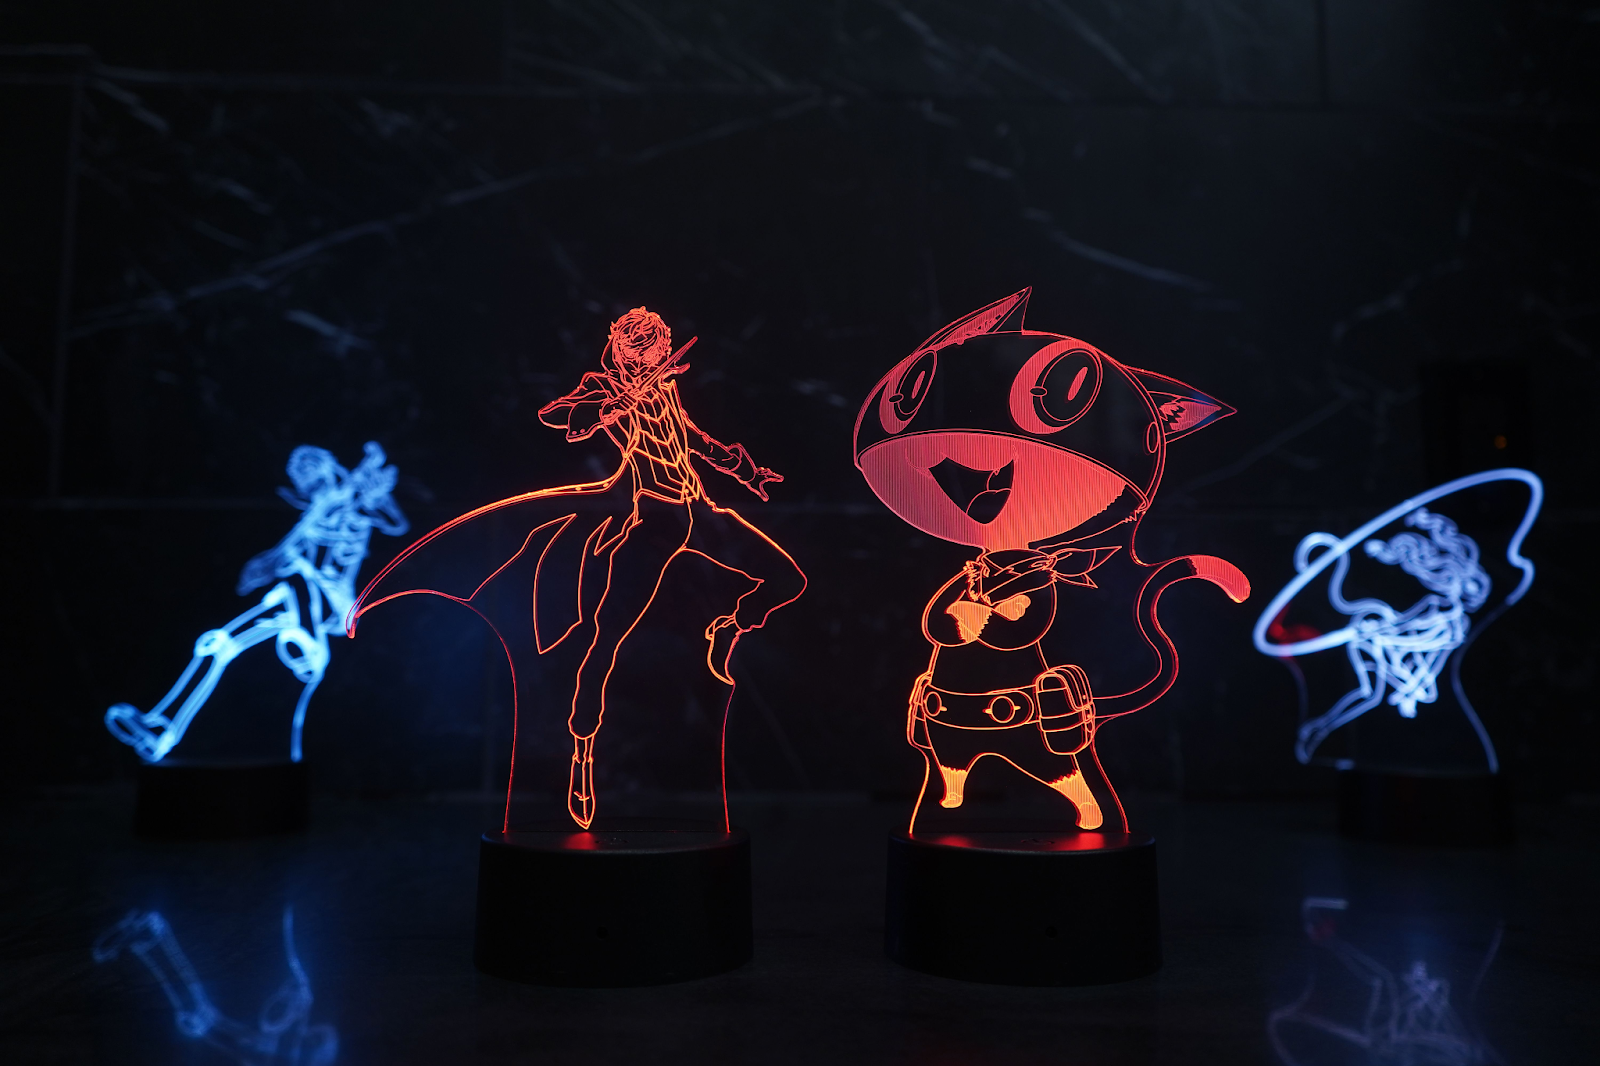 Persona 5 Phantom Thief Lamps Now Available; 16 Colors & More